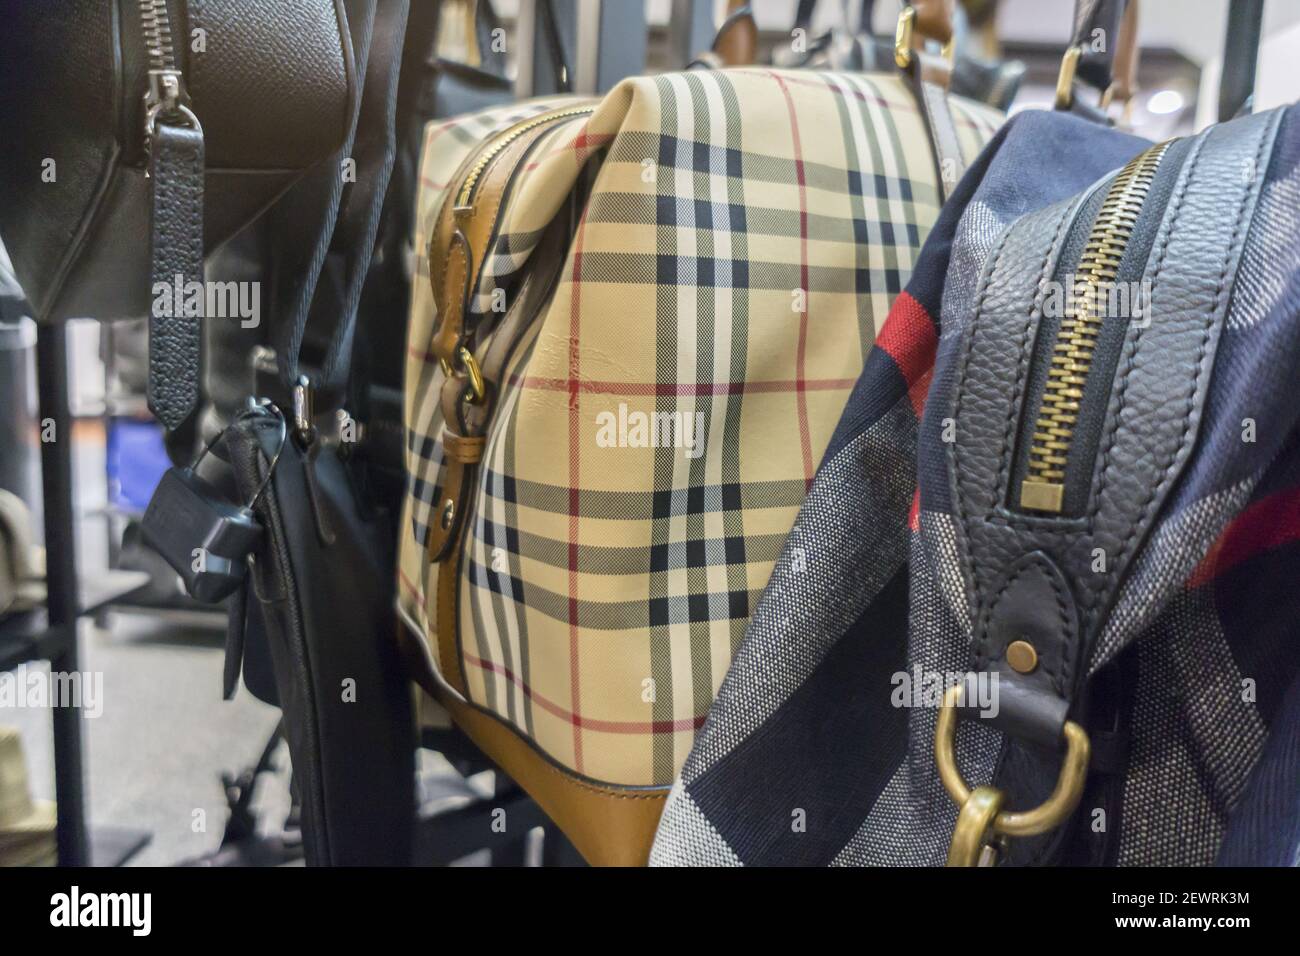 Burberry designer bags on sale at the Saks Fifth Avenue Off Fifth discount spin-off brand in New on Sunday, 6, 2016. Burberry is suing Target alleging that the retailer